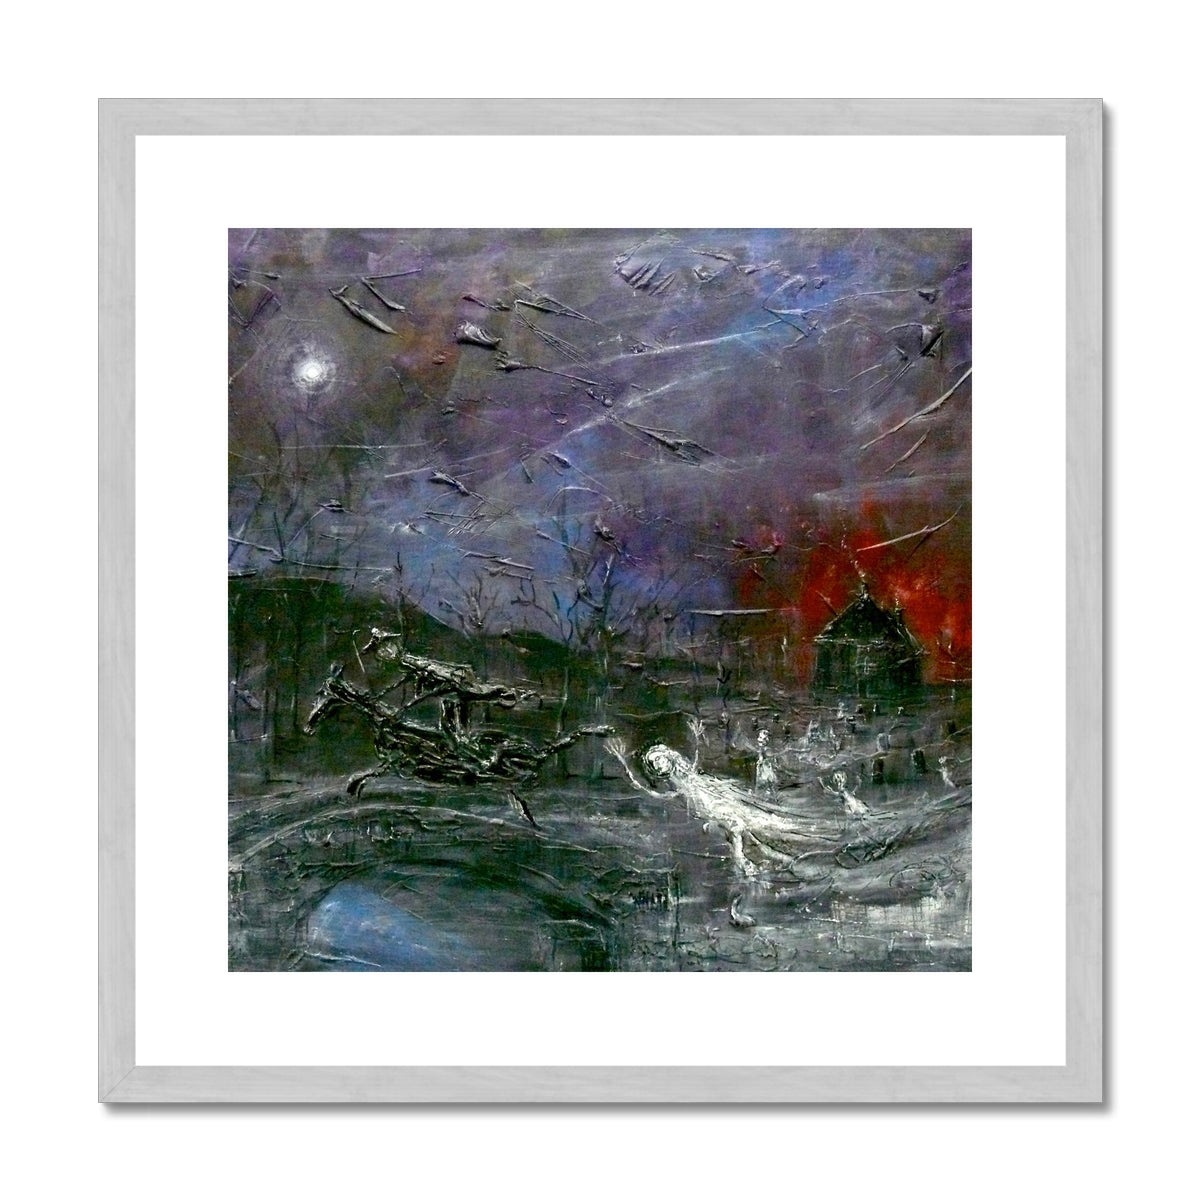 Tam O Shanter Painting | Antique Framed & Mounted Prints From Scotland-Antique Framed & Mounted Prints-Abstract & Impressionistic Art Gallery-20"x20"-Silver Frame-Paintings, Prints, Homeware, Art Gifts From Scotland By Scottish Artist Kevin Hunter